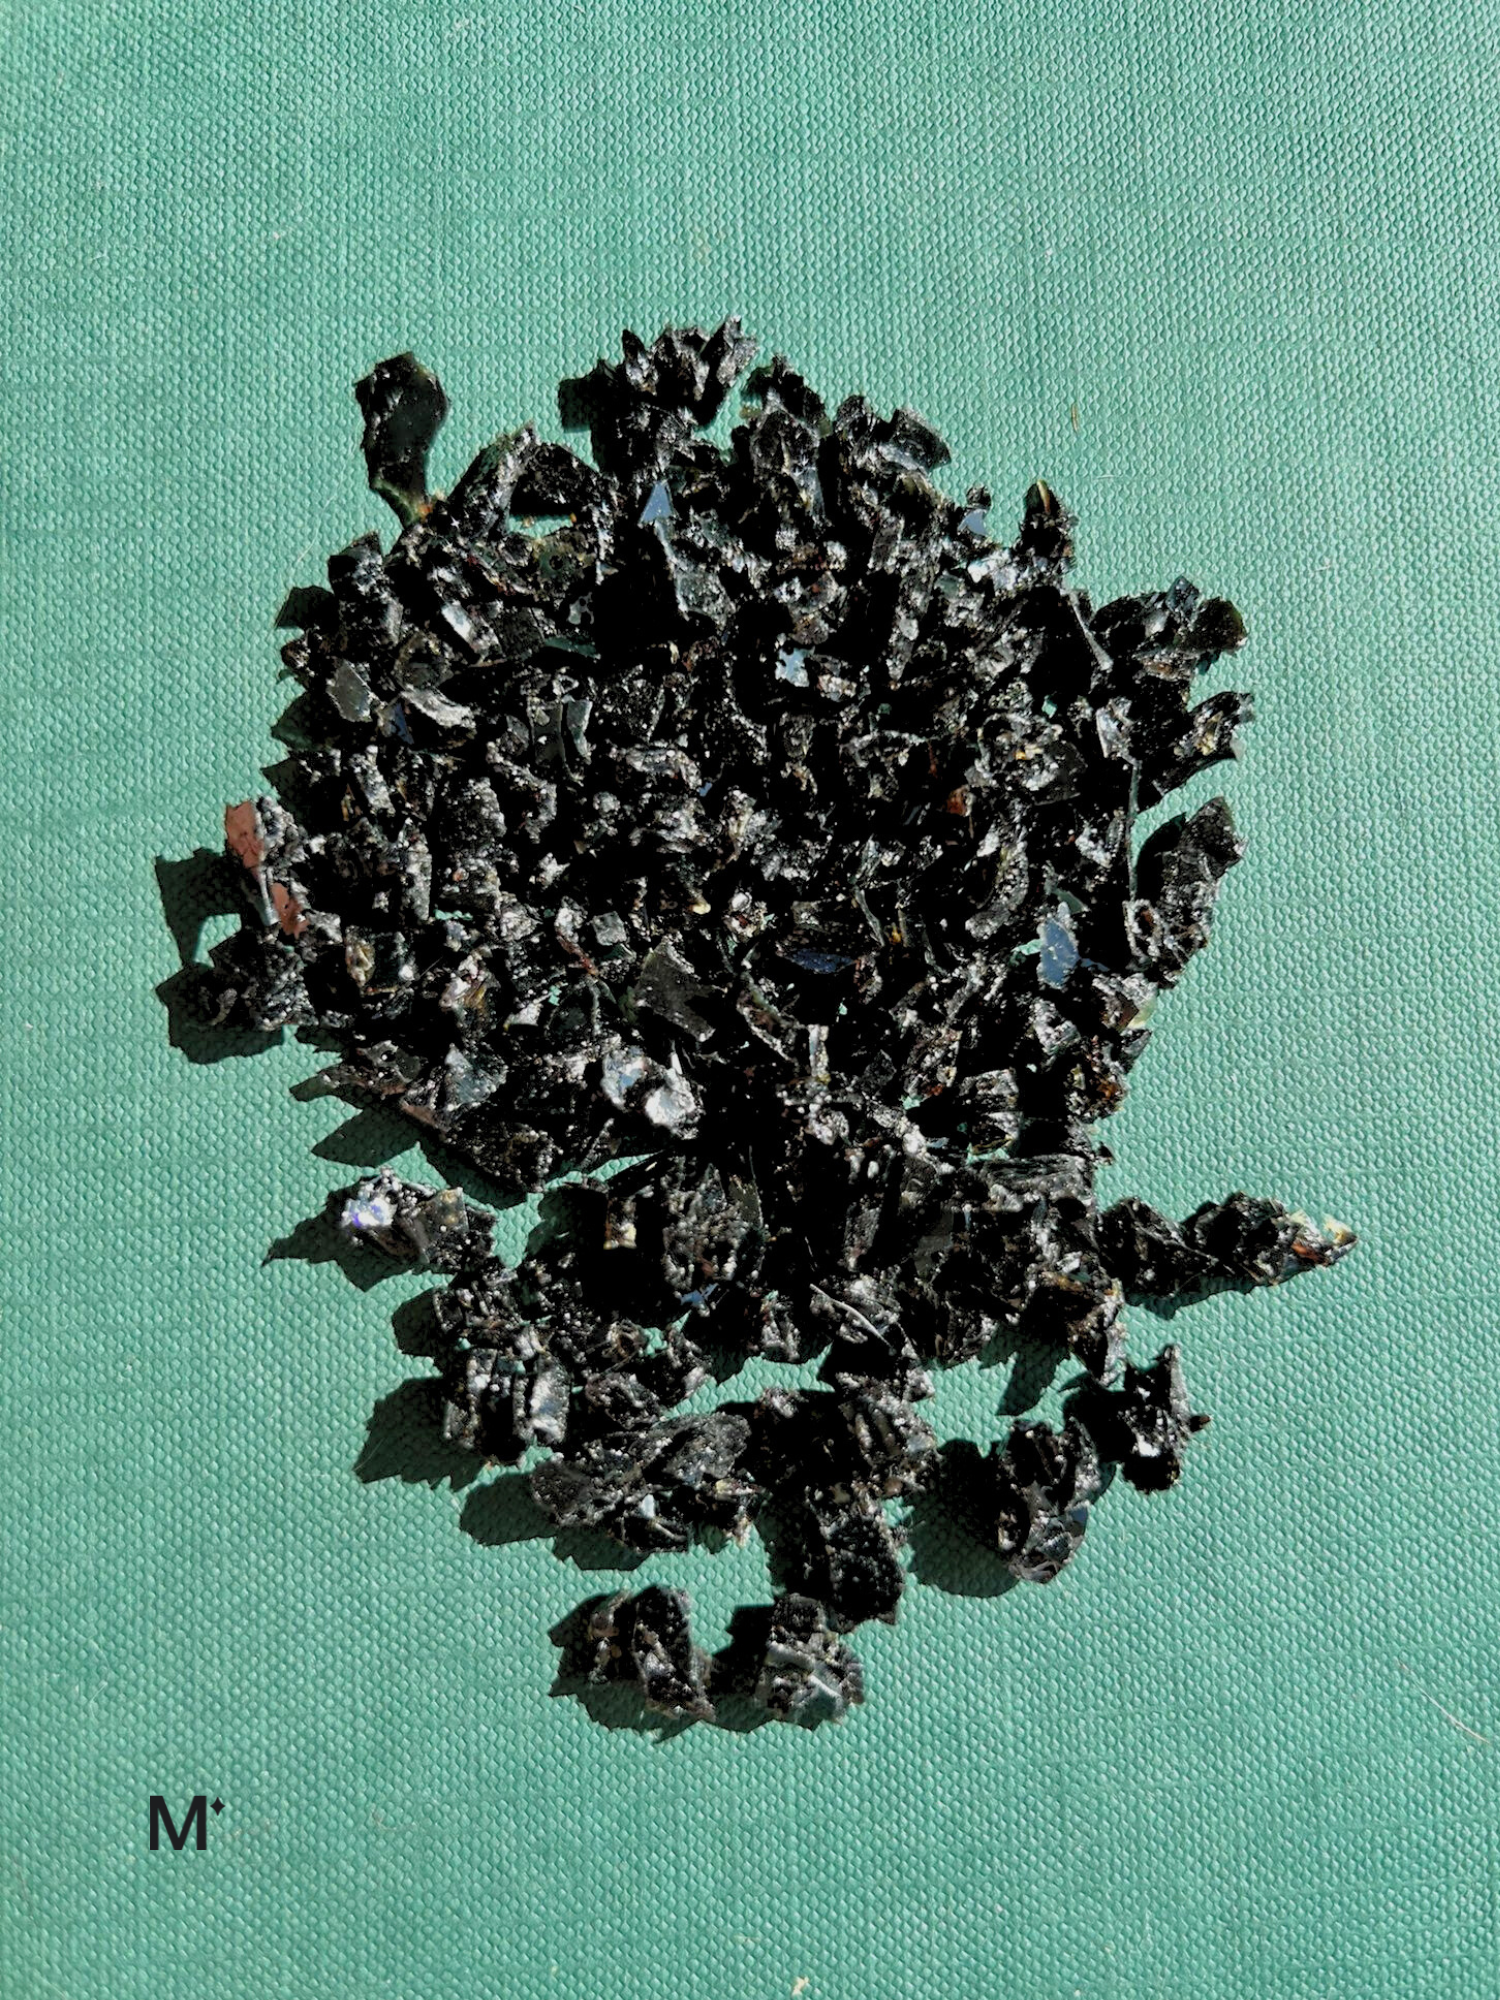 Matereal product image black chips on a green background with logo